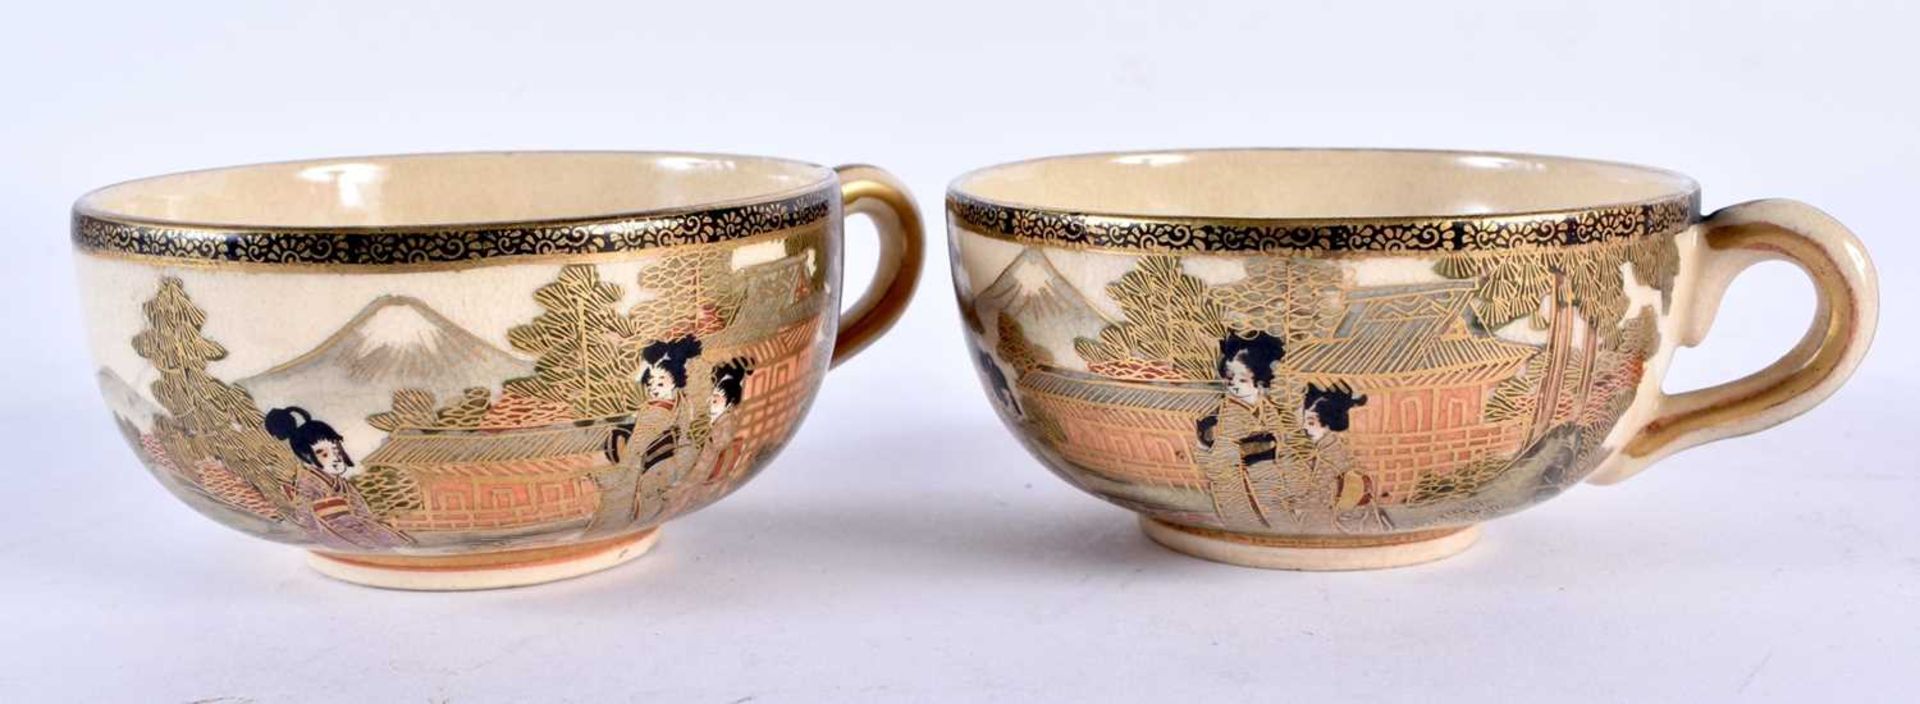 A LATE 19TH CENTURY JAPANESE MEIJI PERIOD SATSUMA TEASET painted with figures and landscapes. - Image 7 of 9